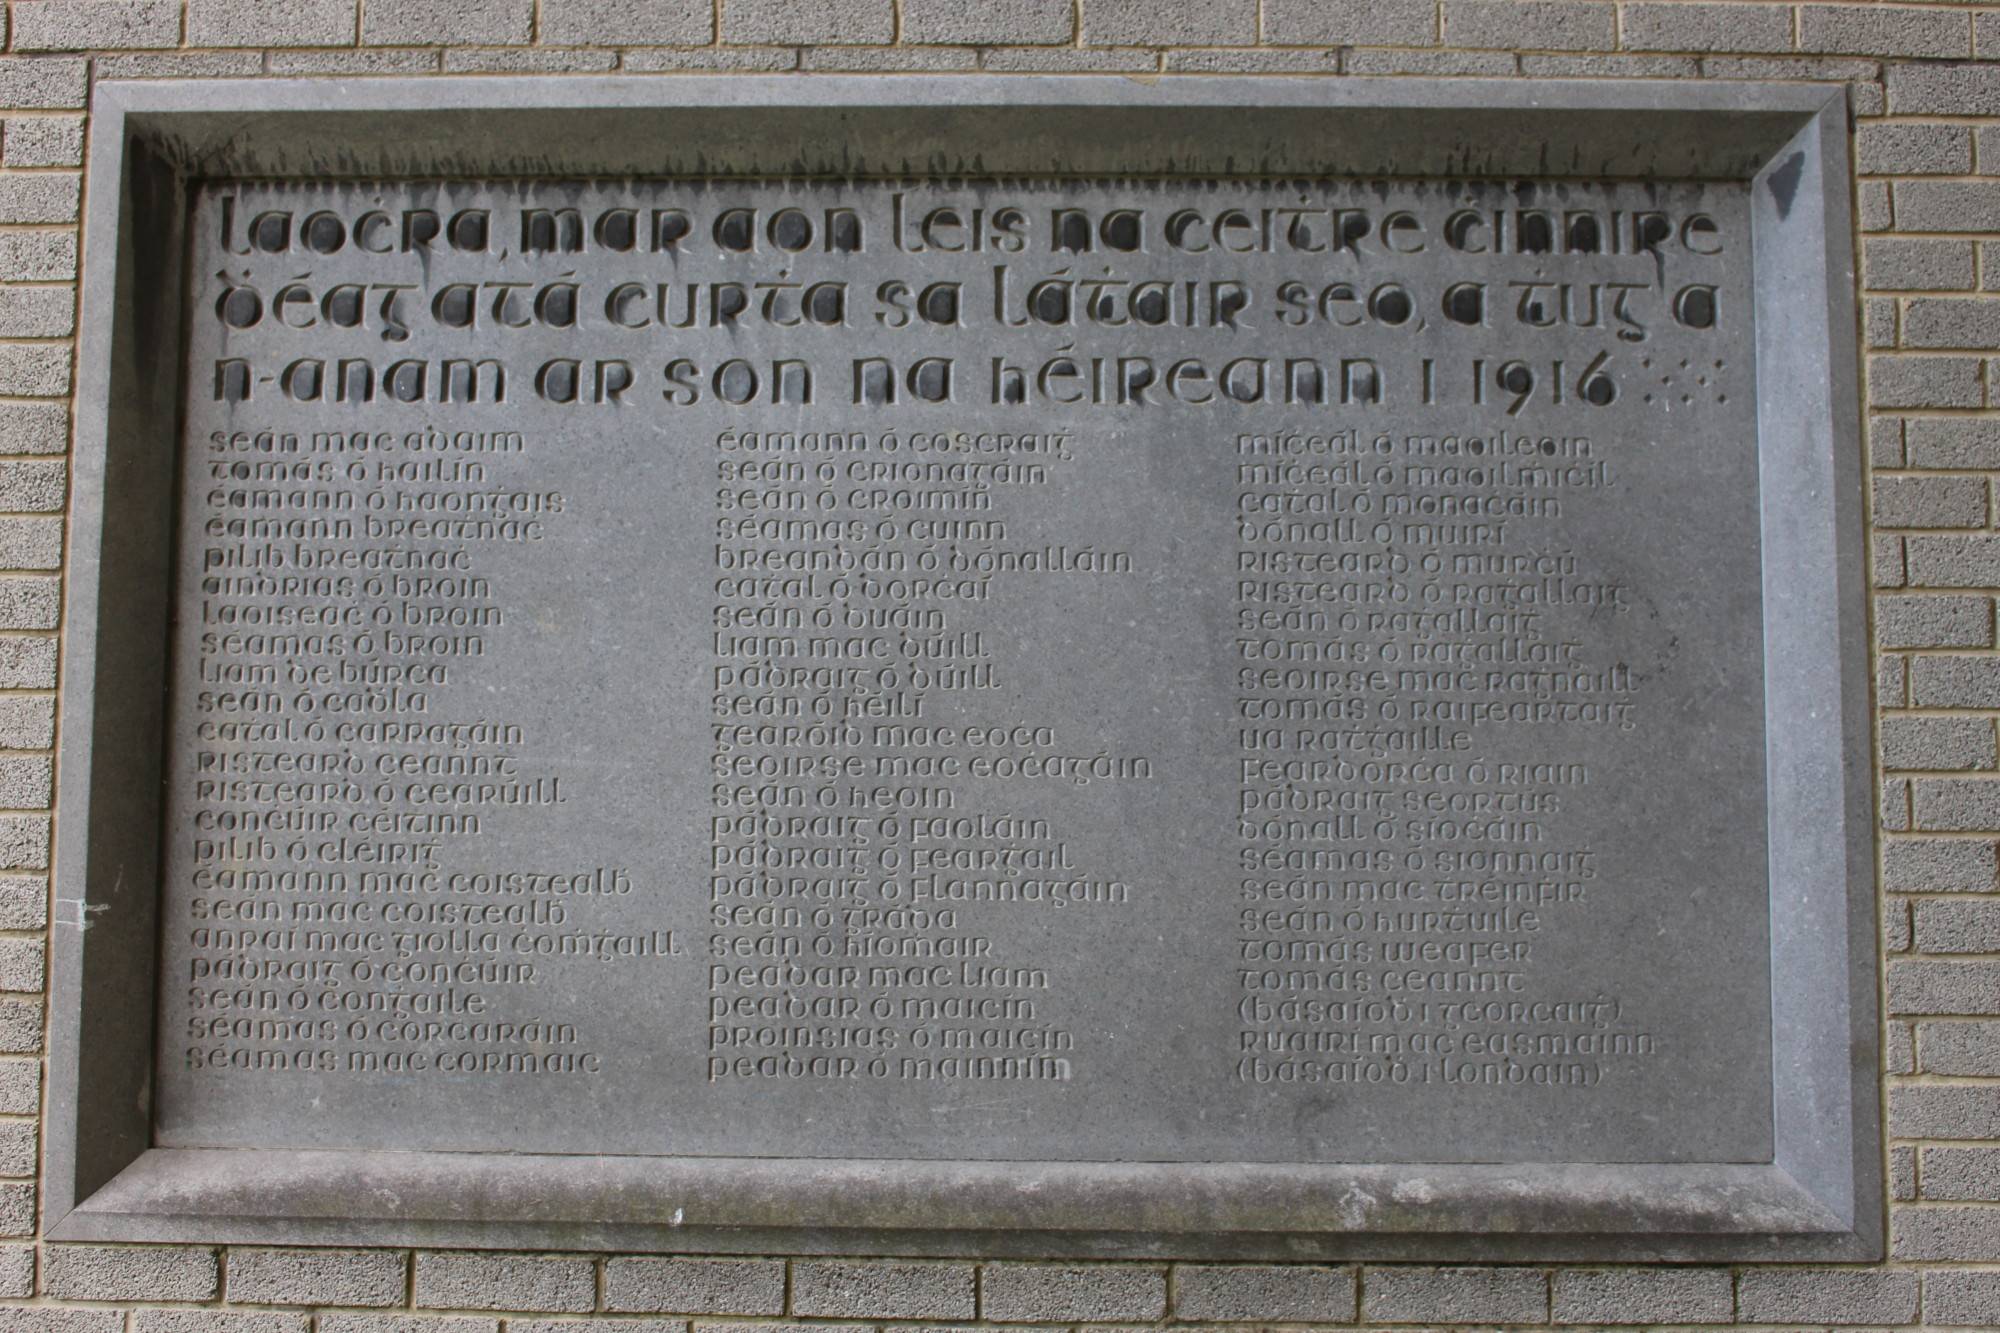 A list inscribed in stone of those buried in the plot at Arbour Hill. OPW. 